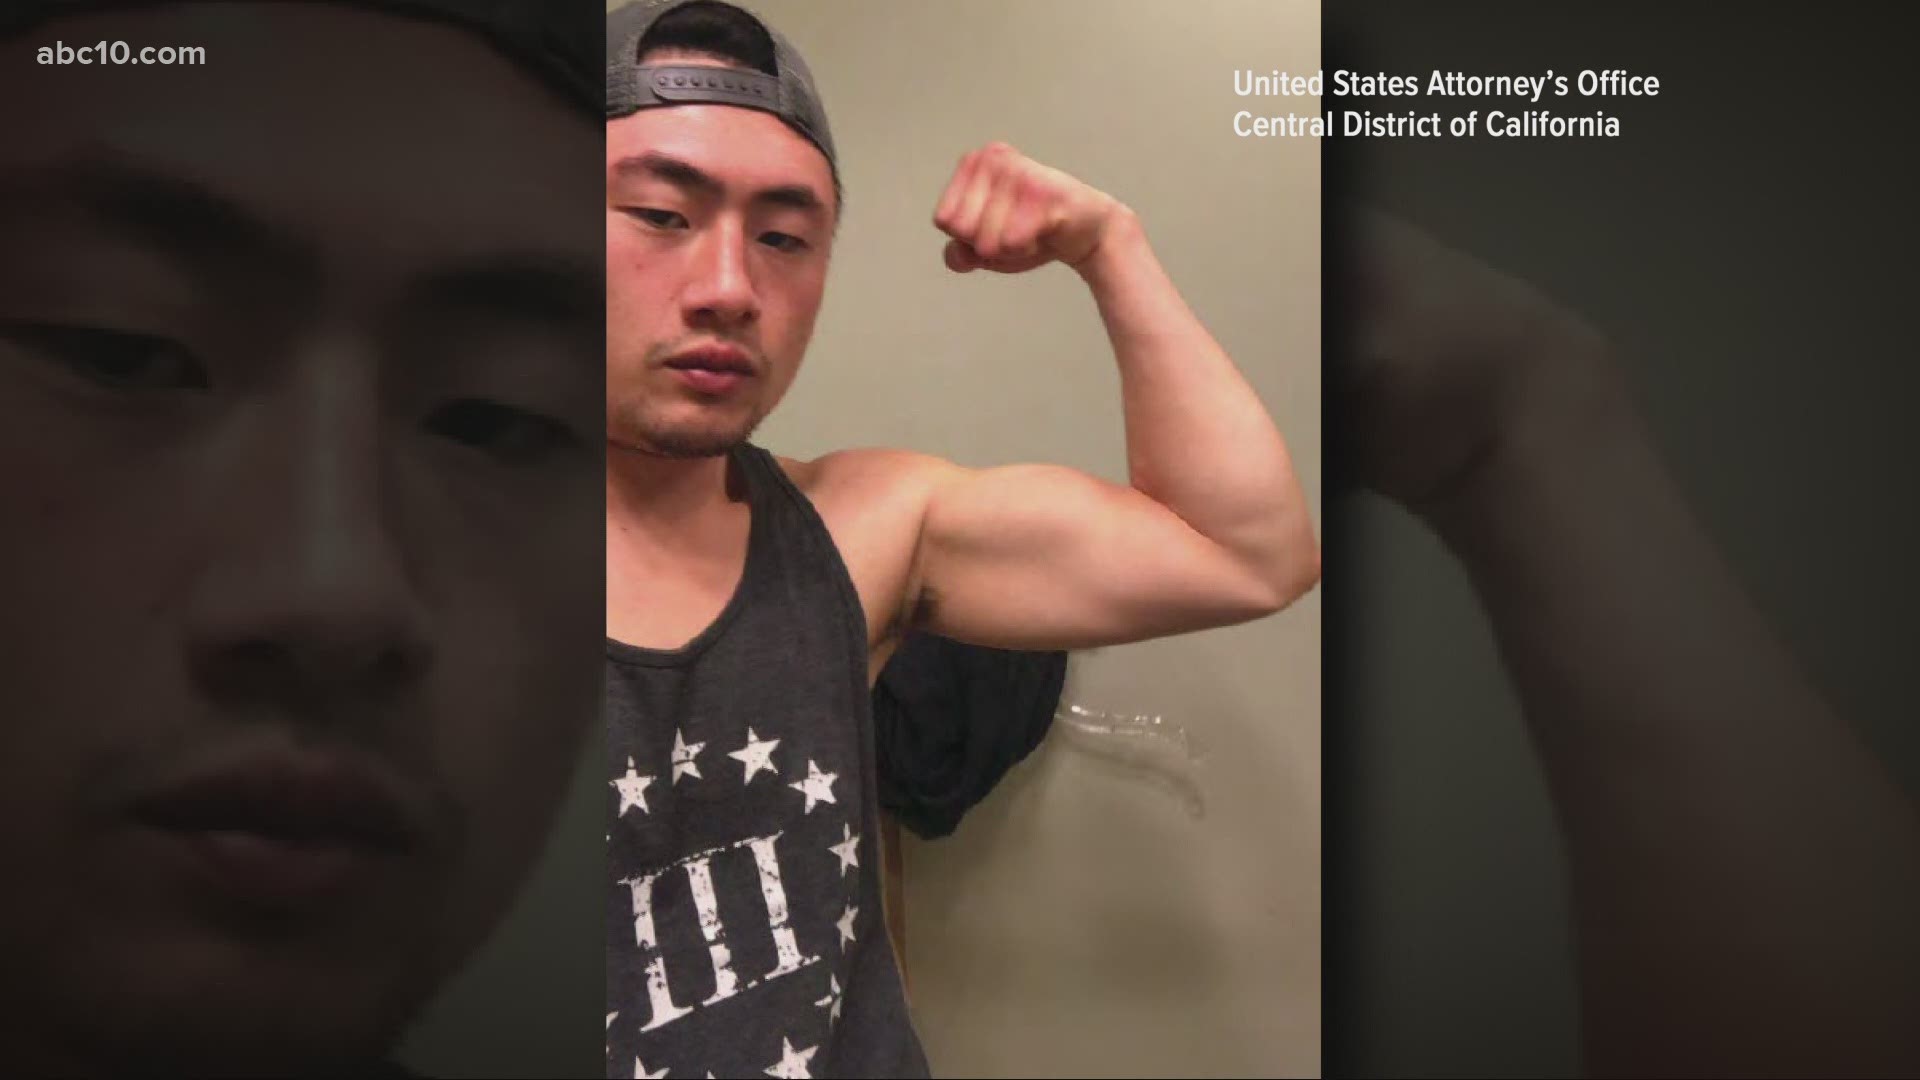 Benjamin Jong Ren Hung, 28, is facing at least one charge of conspiracy to transport firearms across state lines and for lying about how he got the guns.